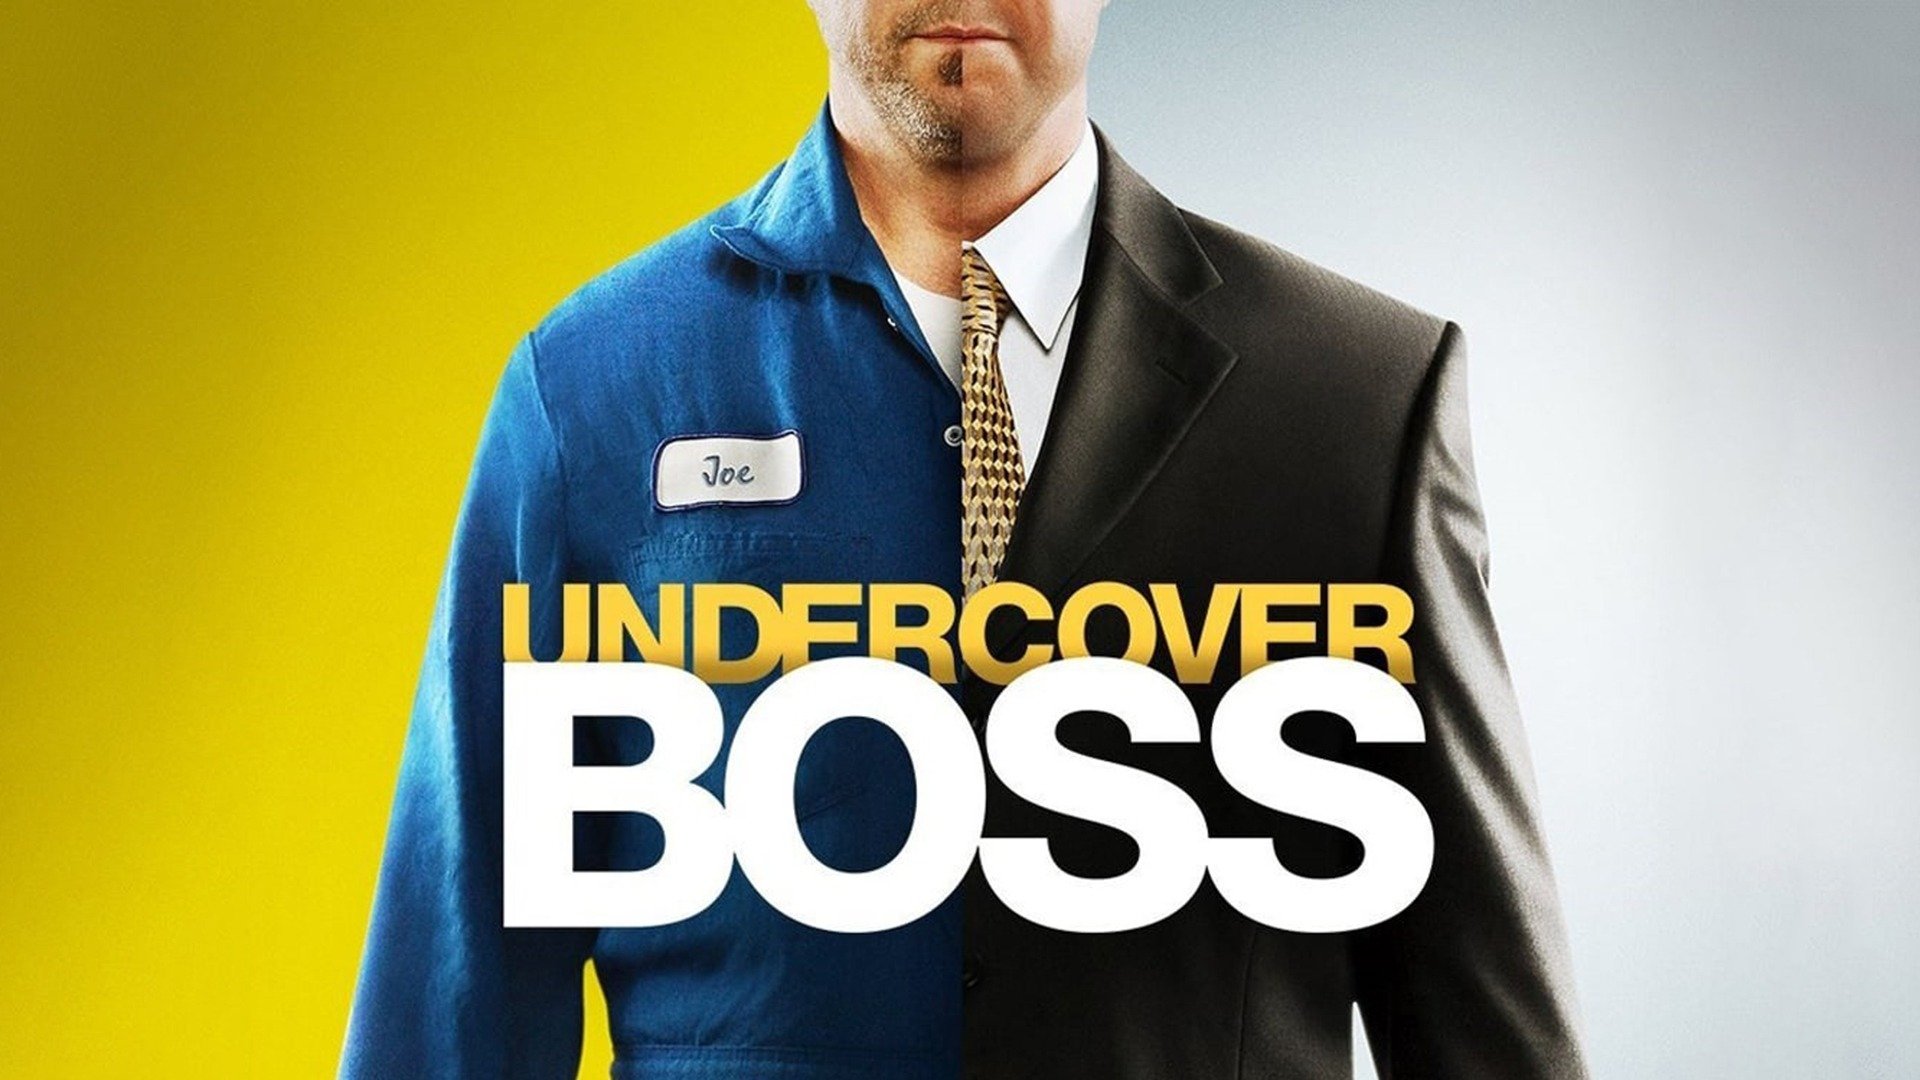 Undercover Boss - CBS & CNBC Reality Series - Where To Watch